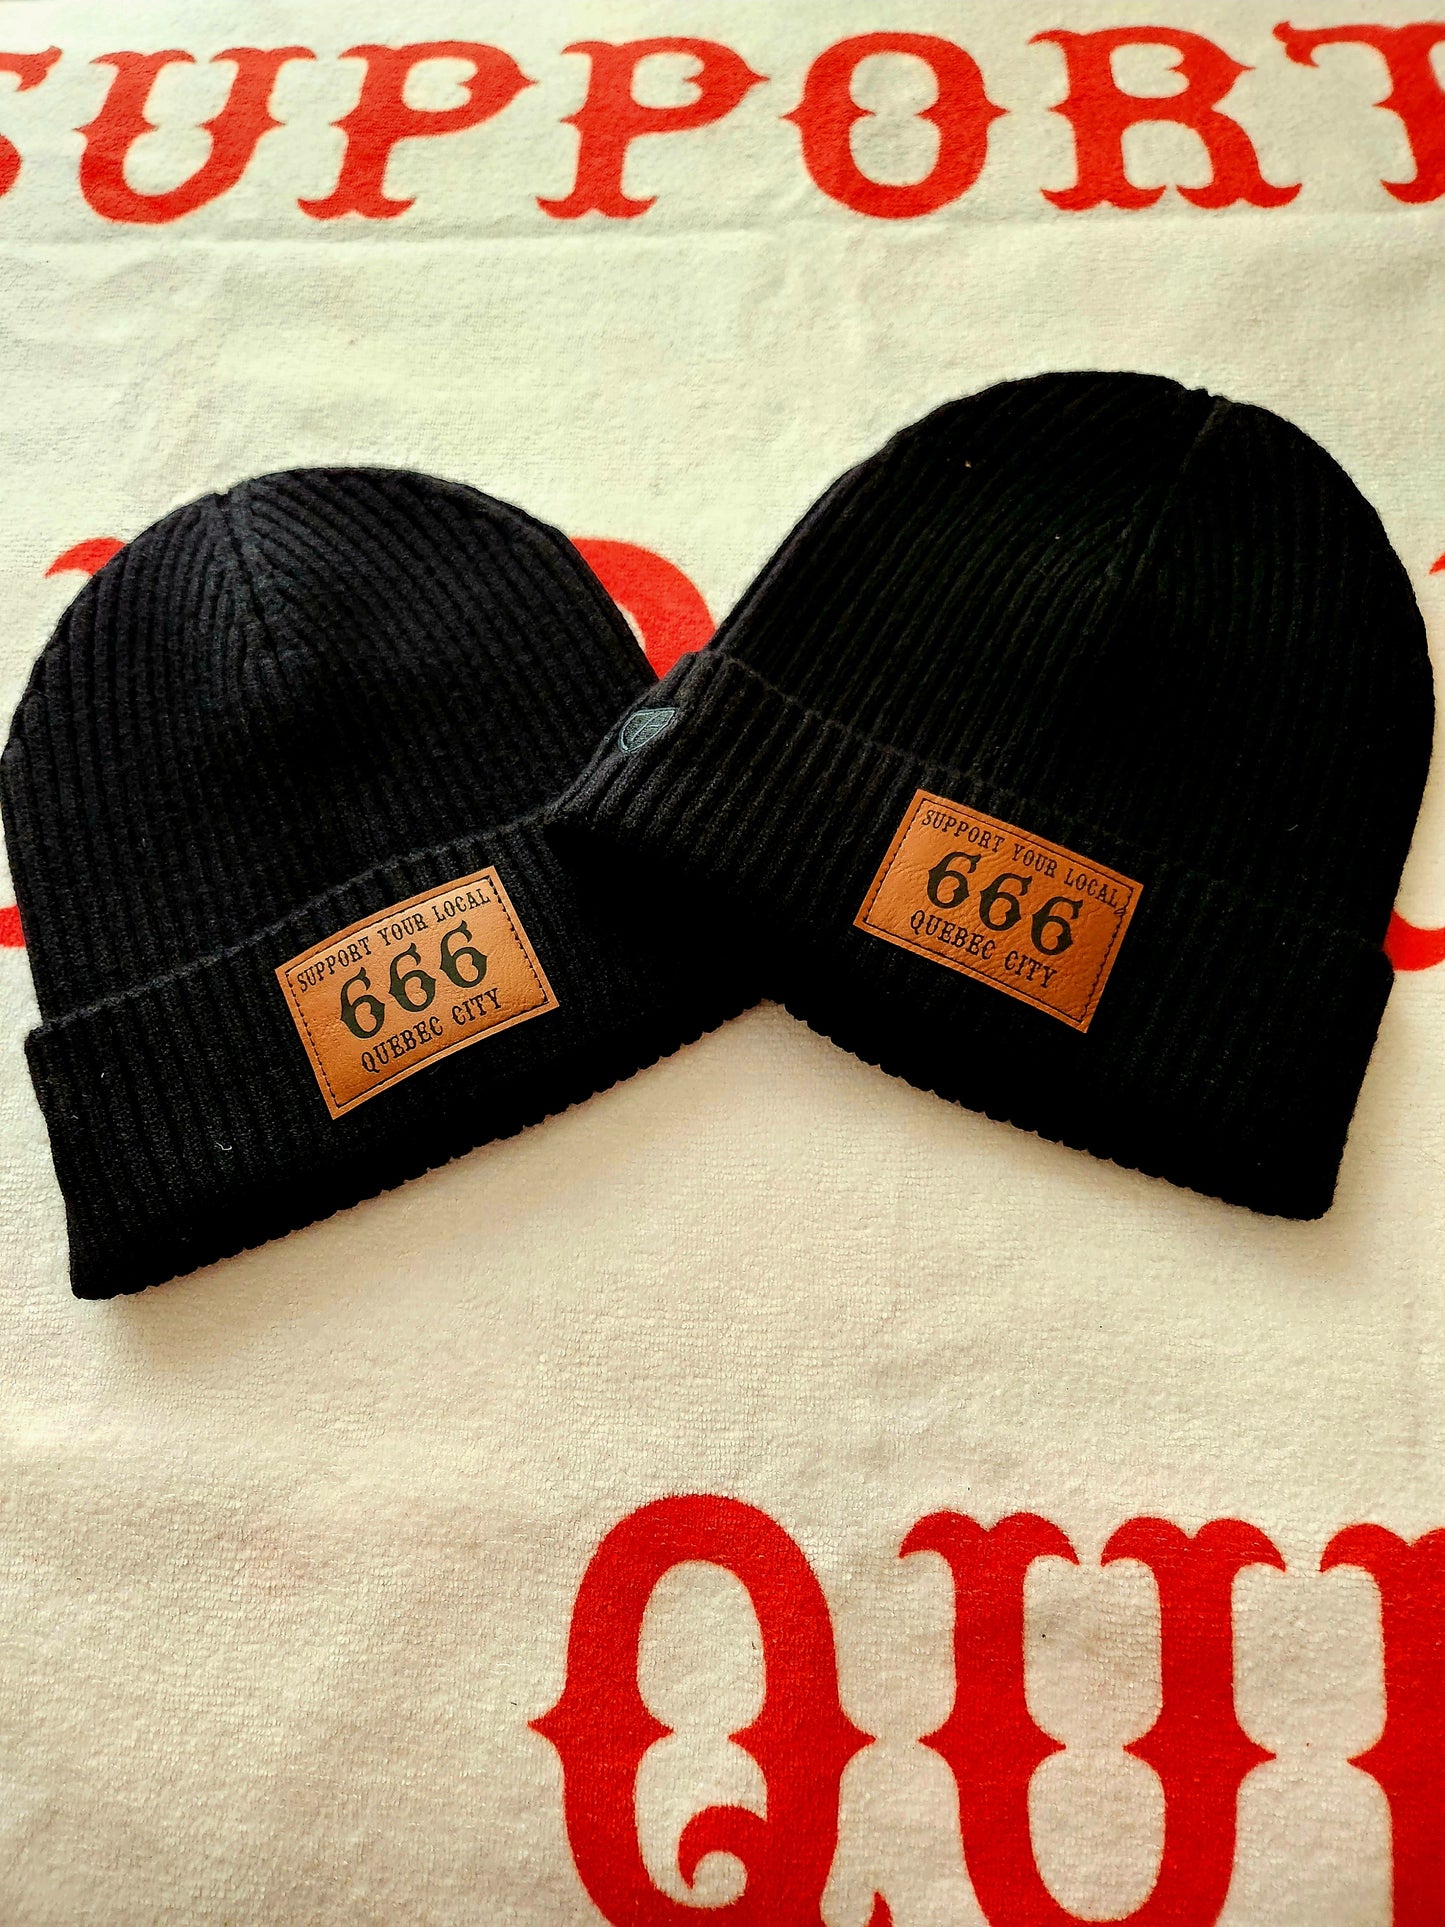 Tuque 666 edition limiter